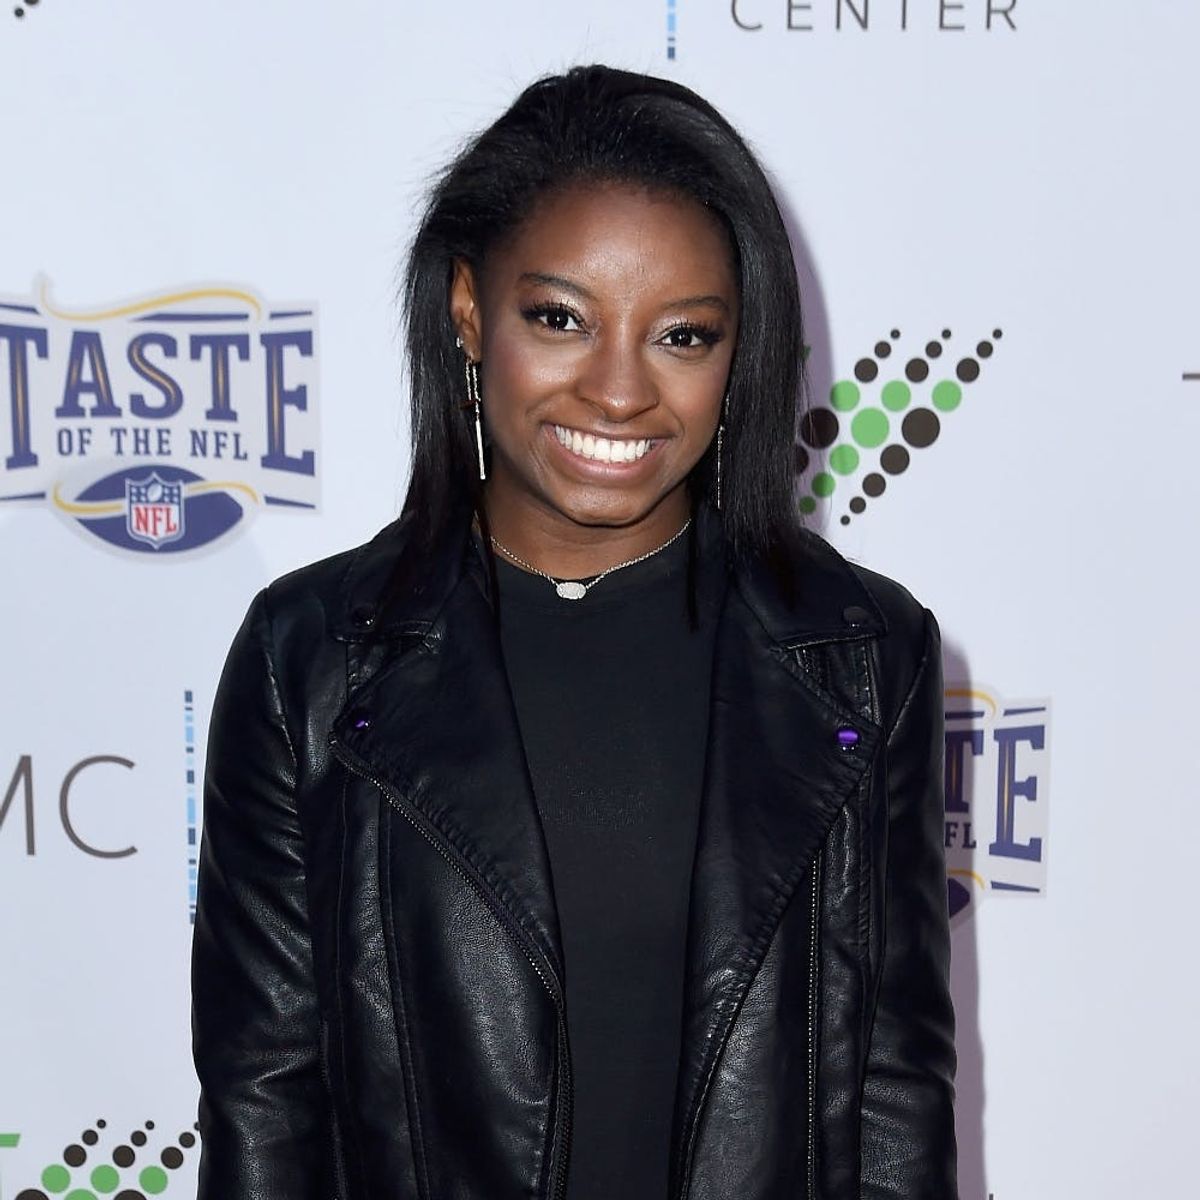 Simone Biles Fully Shut Down a Hater Who Called Her a “Sucky Role Model”